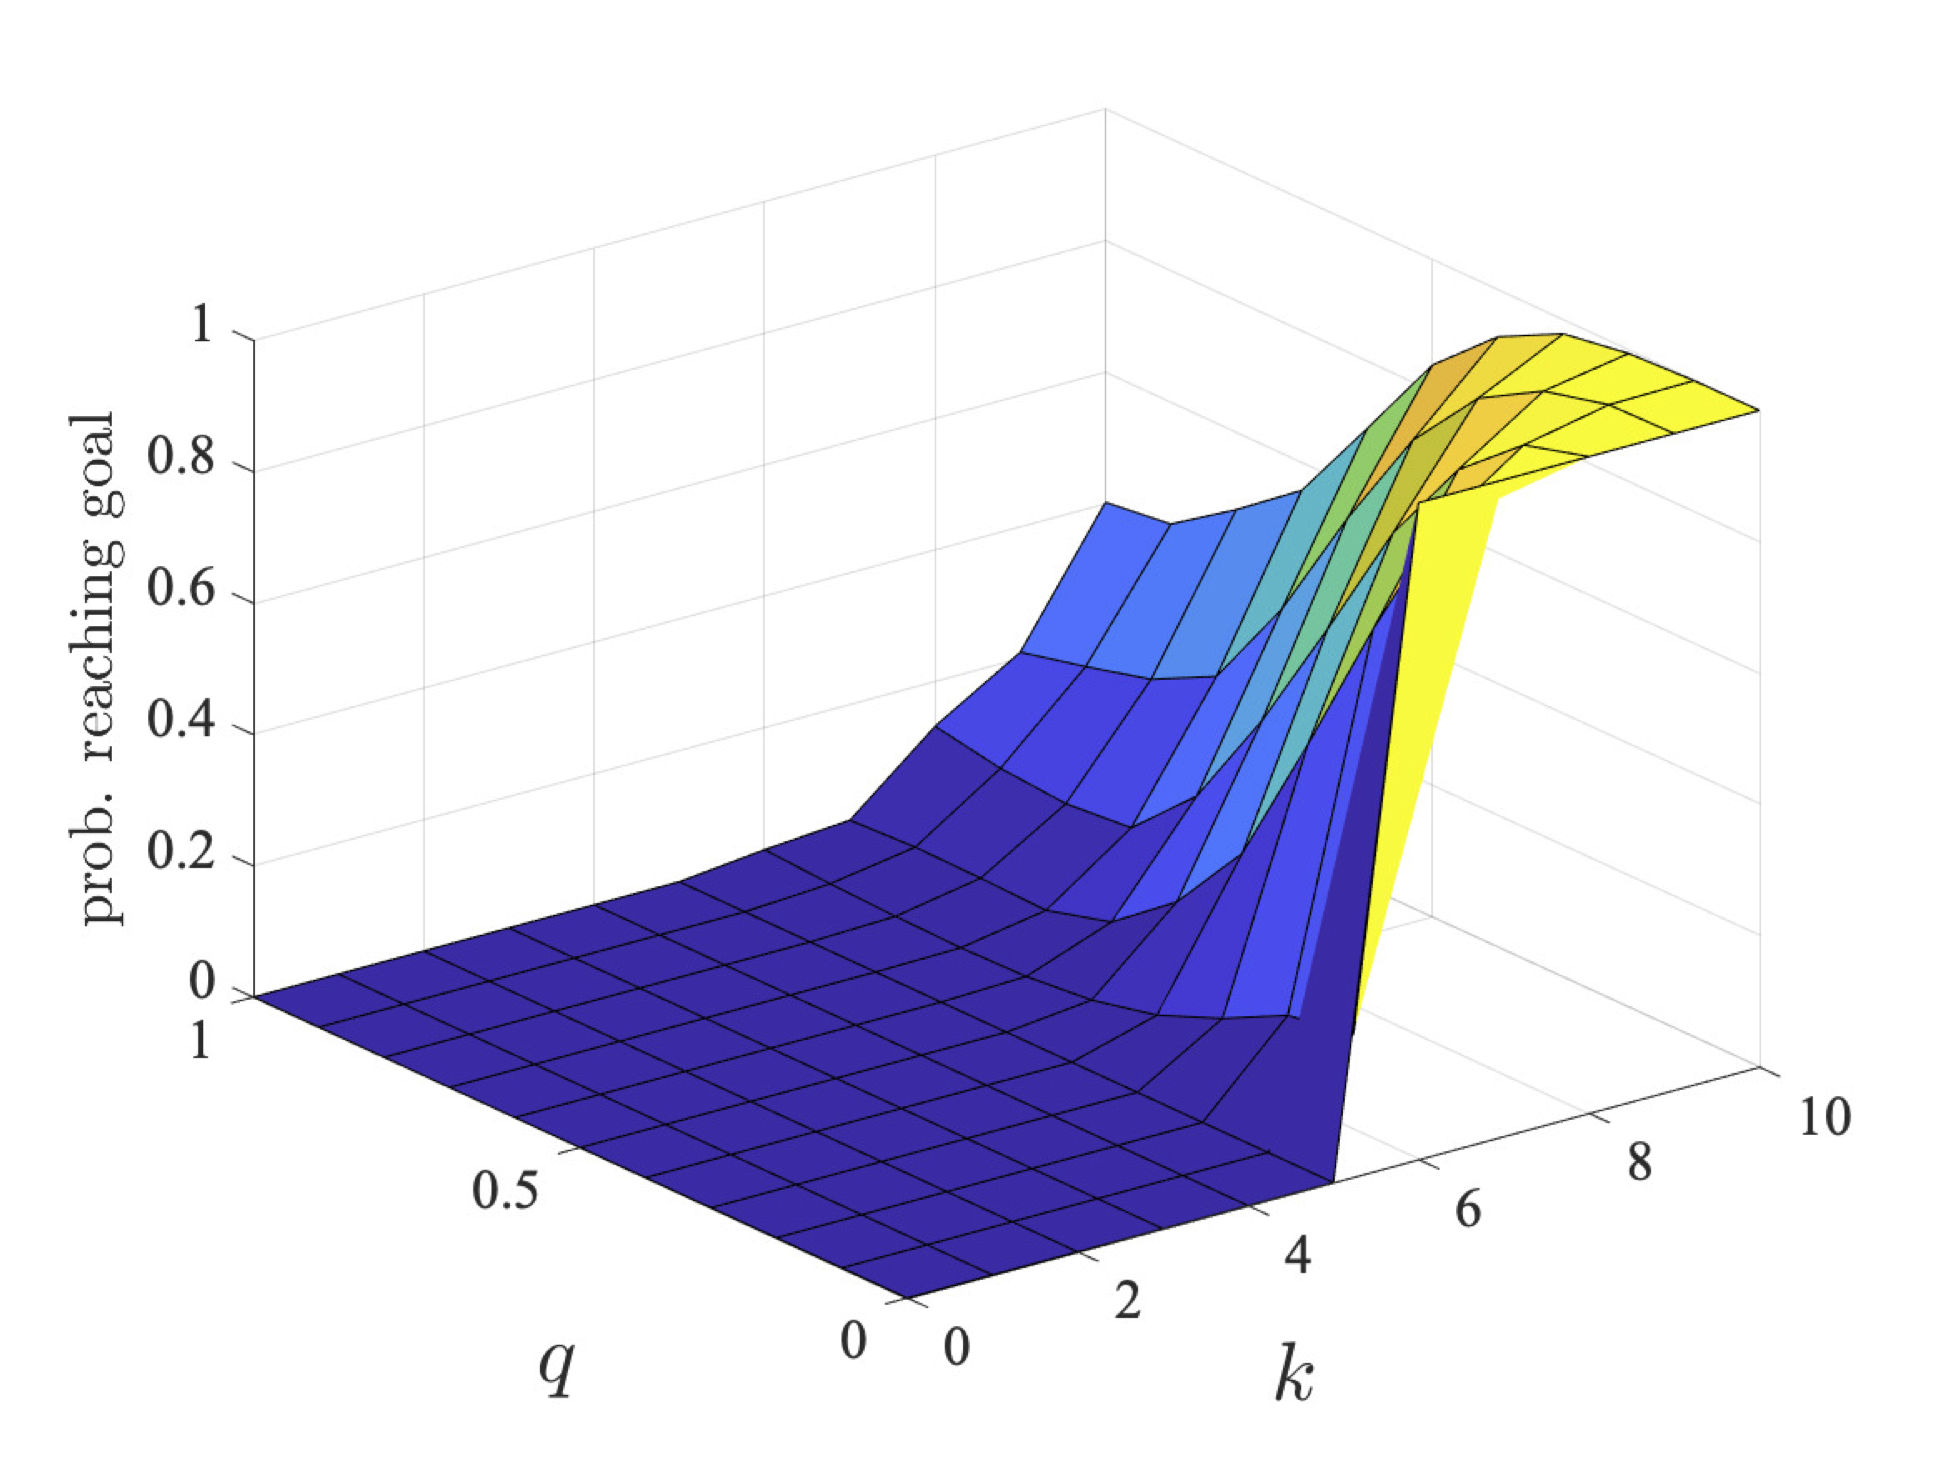 plot: maximum probability robot 1 can ensure they reach their goal within a deadline (l=7)